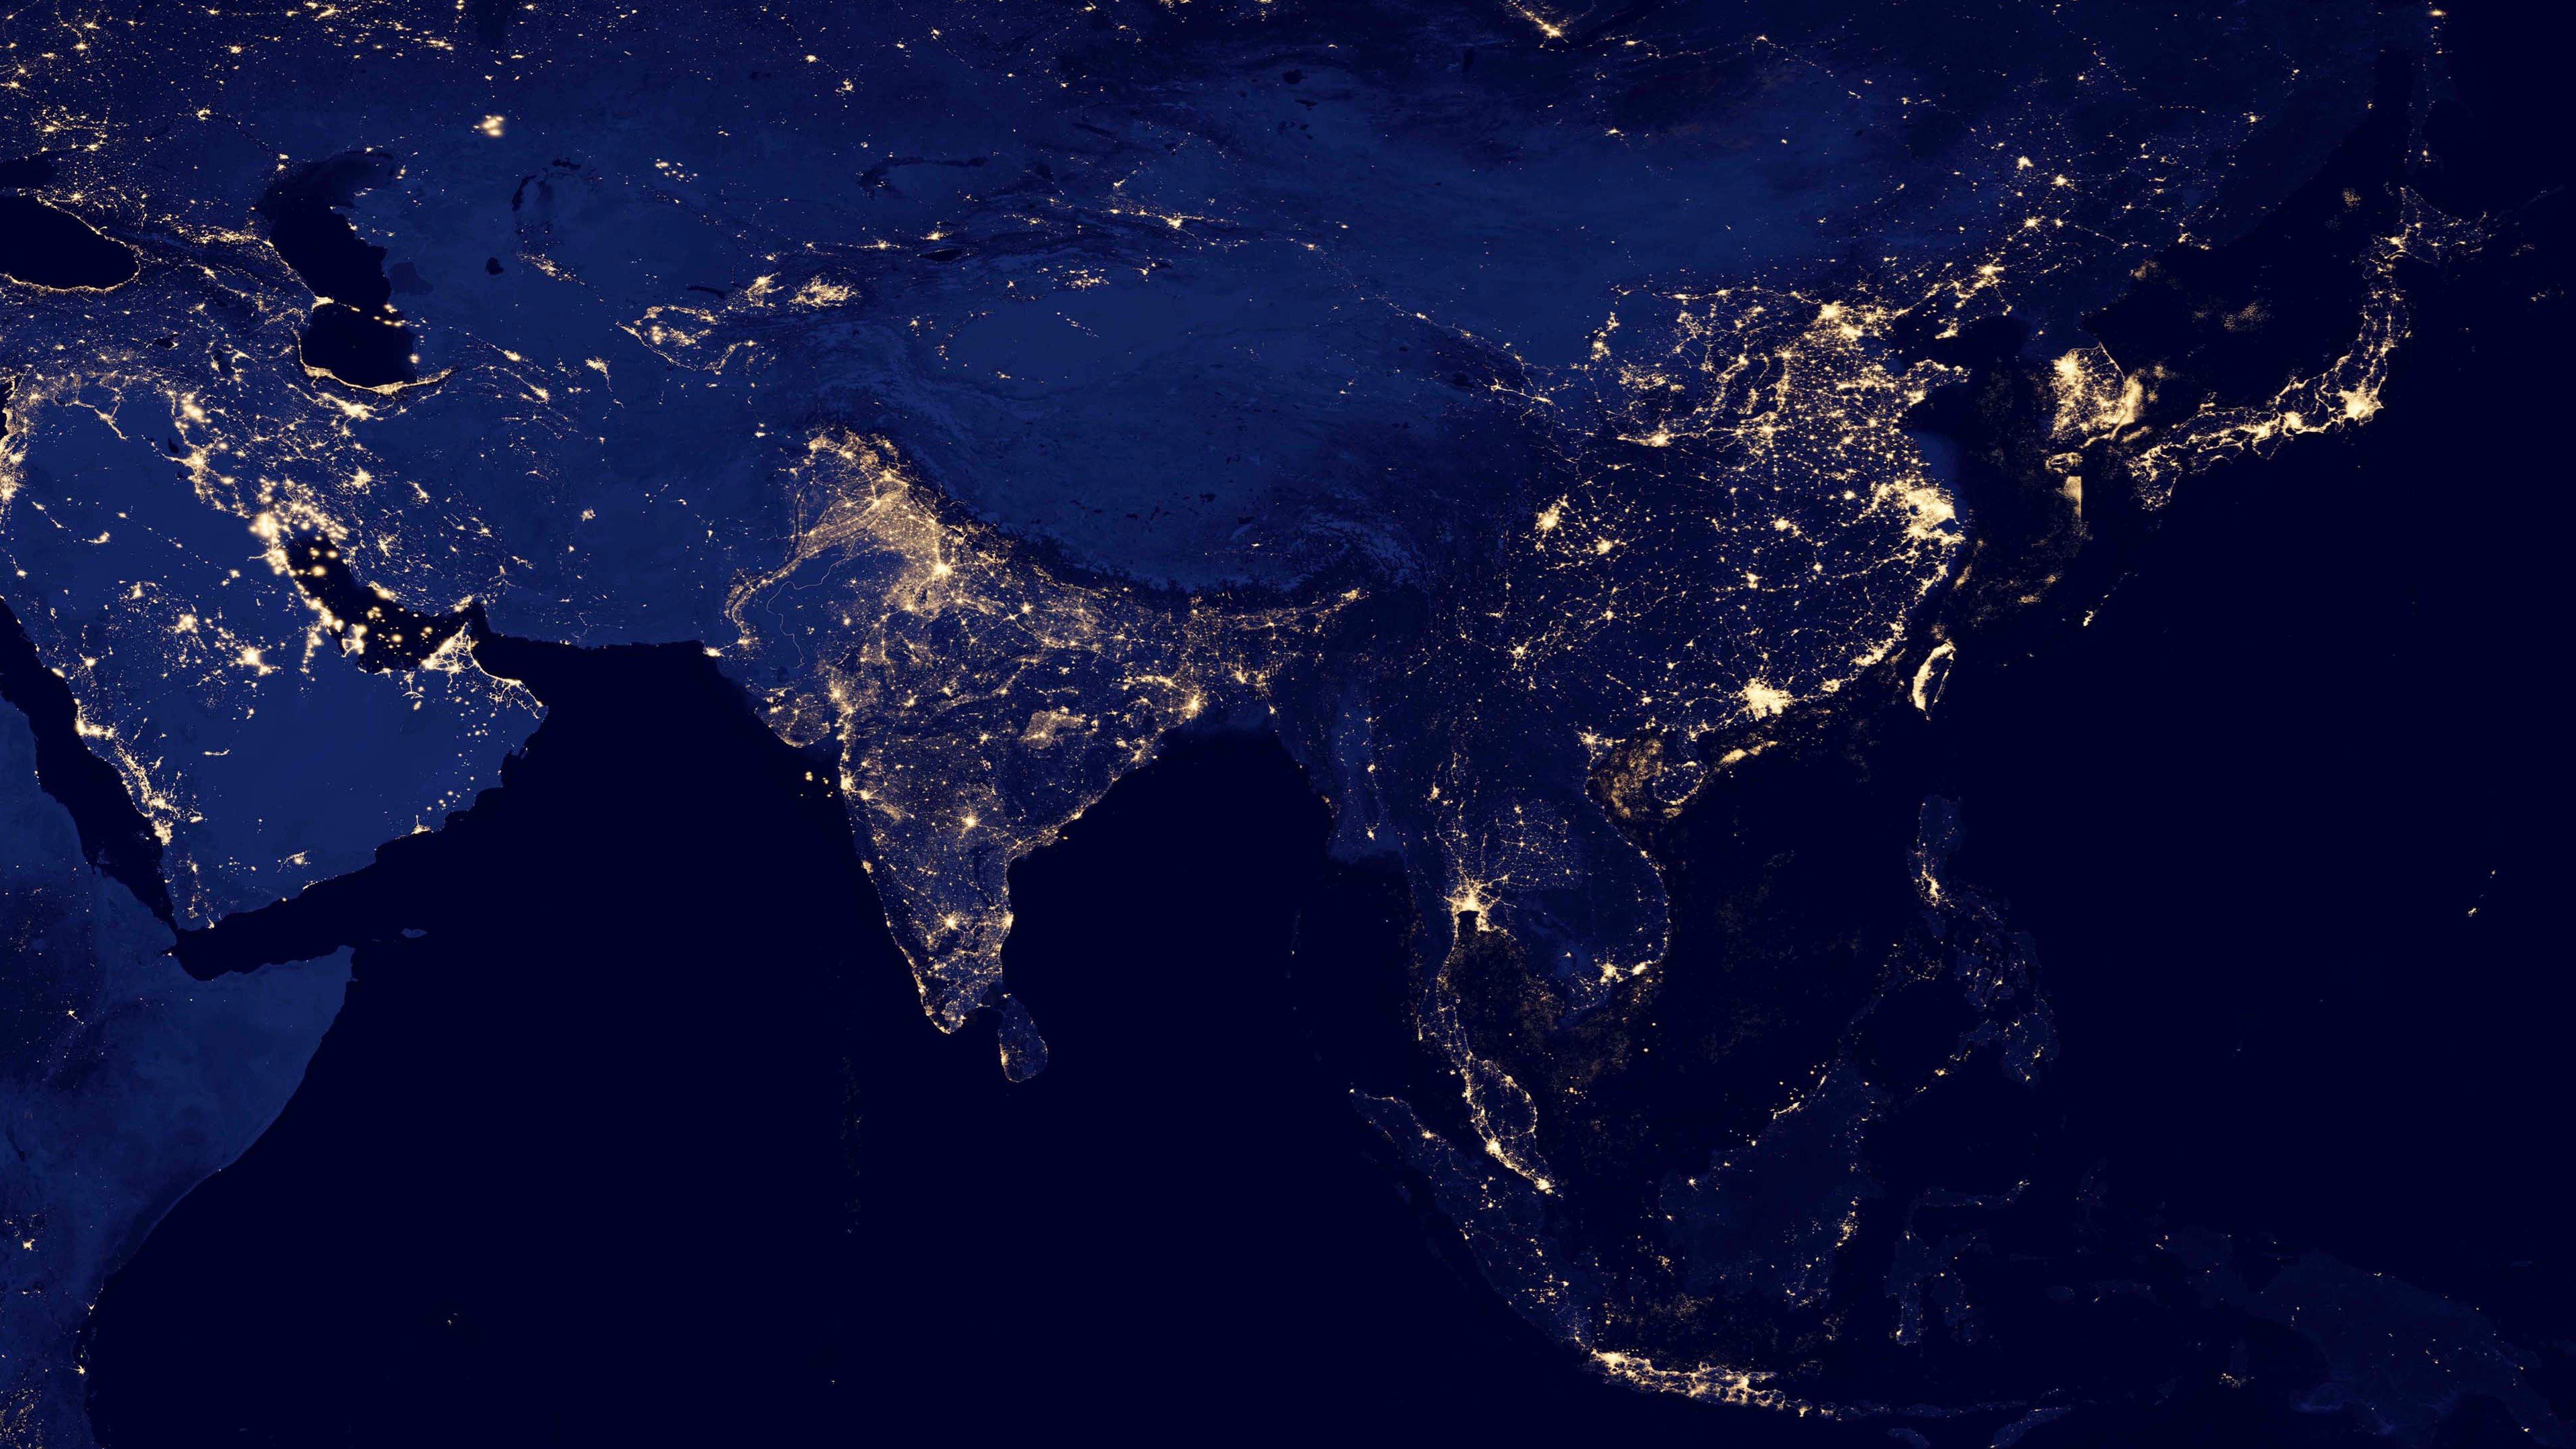 4K, Korean, India, Earth, continents, China, satellite imagery, Japan, Asia, night, world, city lights Gallery HD Wallpaper